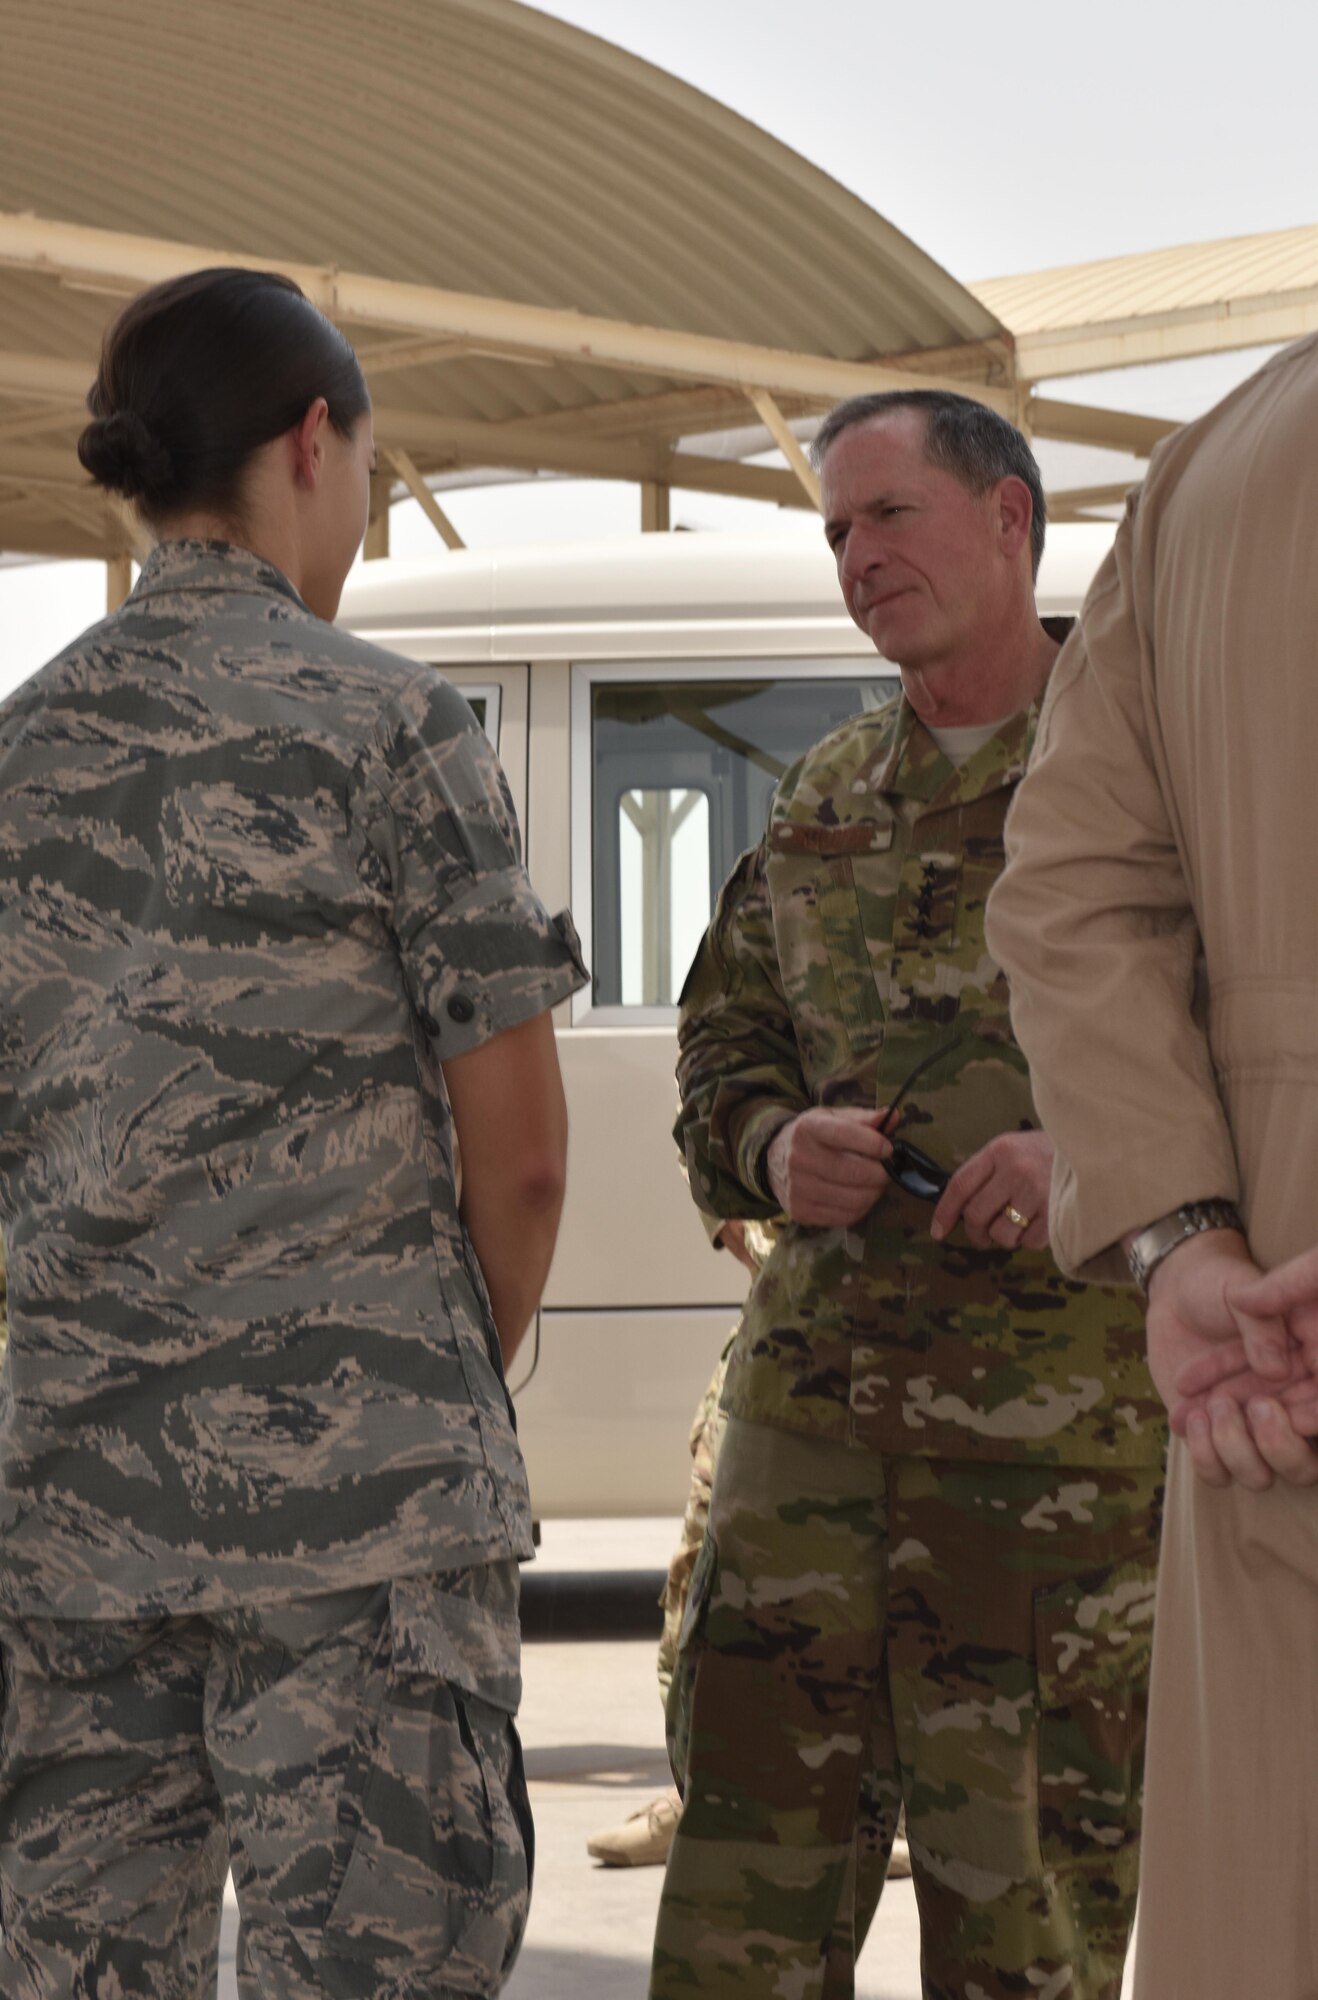 Lt. Erin Shelhorse, officer in charge of the 27th Expeditionary Aircraft Maintenance Unit, speaks with Air Force Chief of Staff Gen. David L. Goldfein at Al Dhafra Air Base, United Arab Emirates, Aug. 18, 2017.